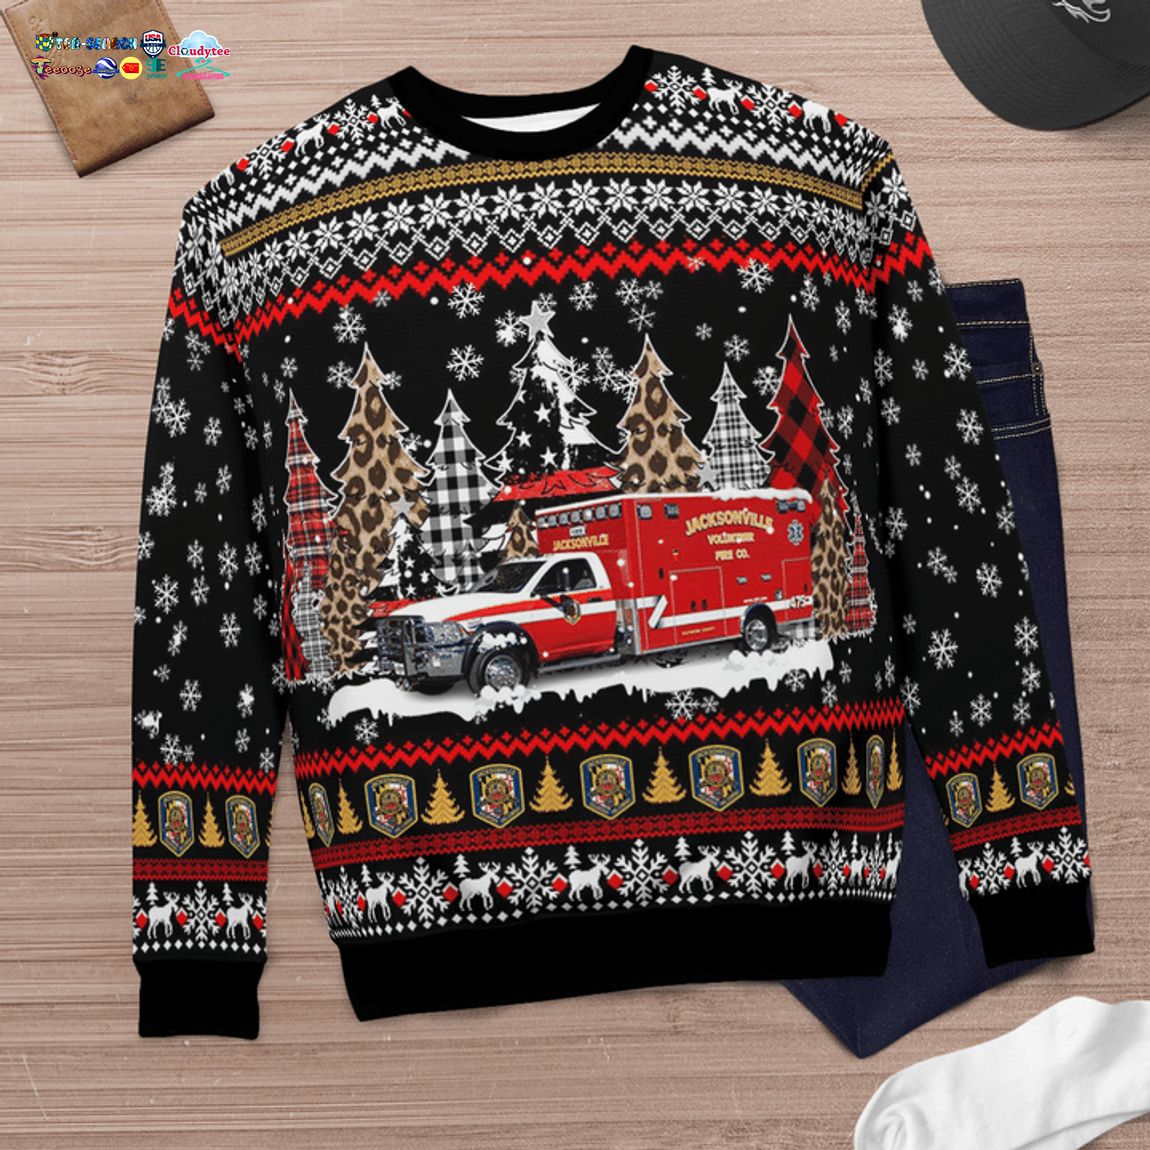 Maryland Jacksonville Volunteer Fire Company Station 47 3D Christmas Sweater